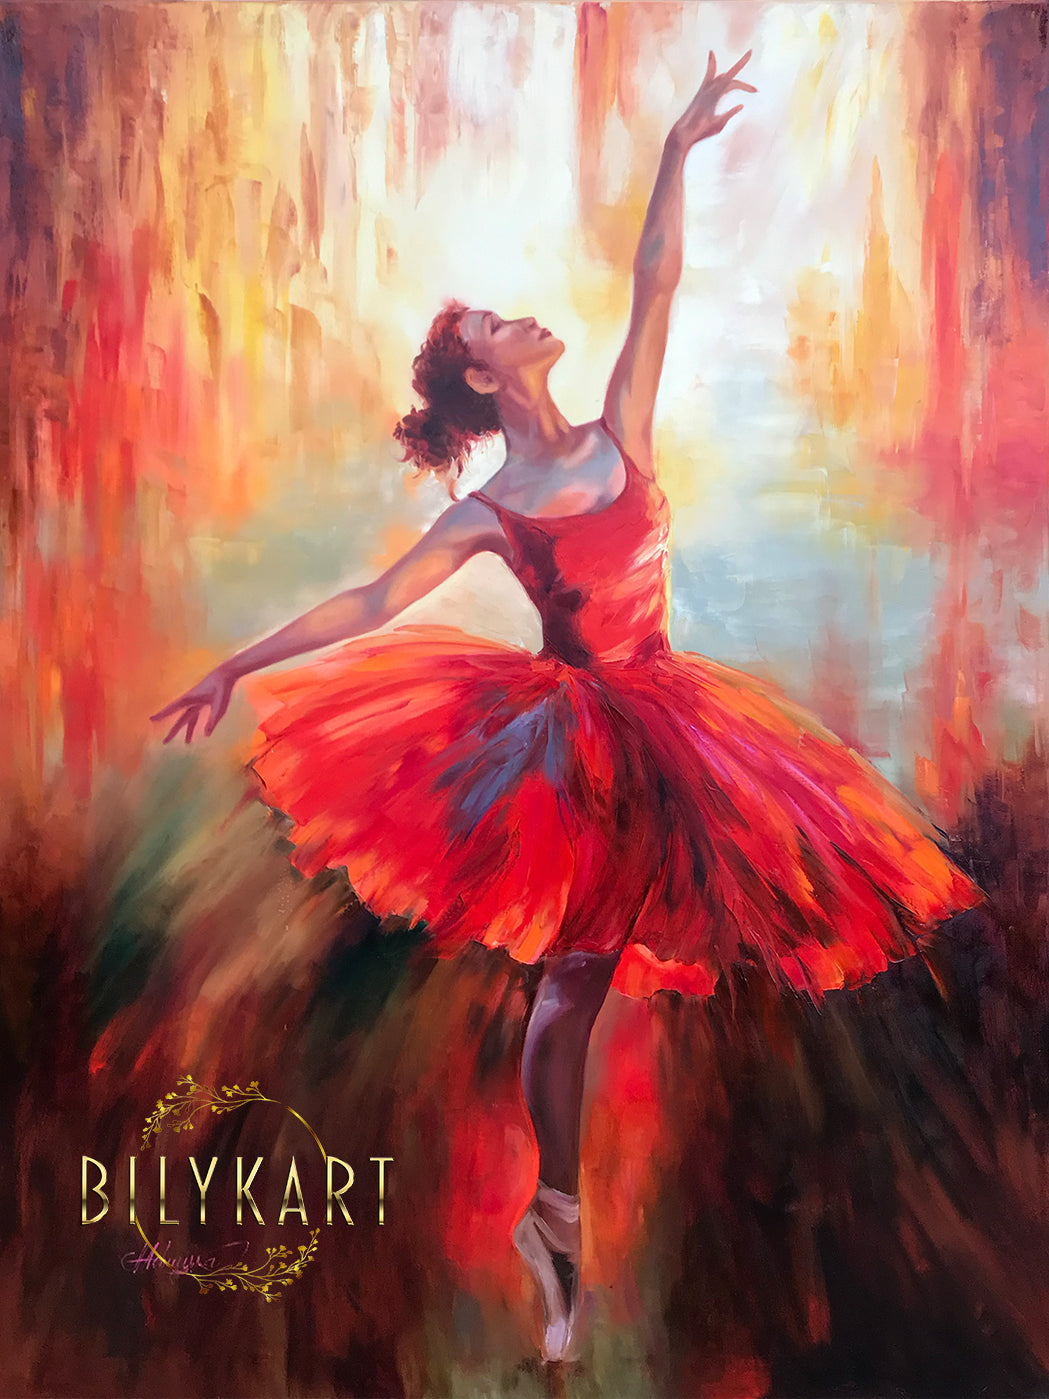 Dancing Ballerina in Red Original Oil Painting on Canvas